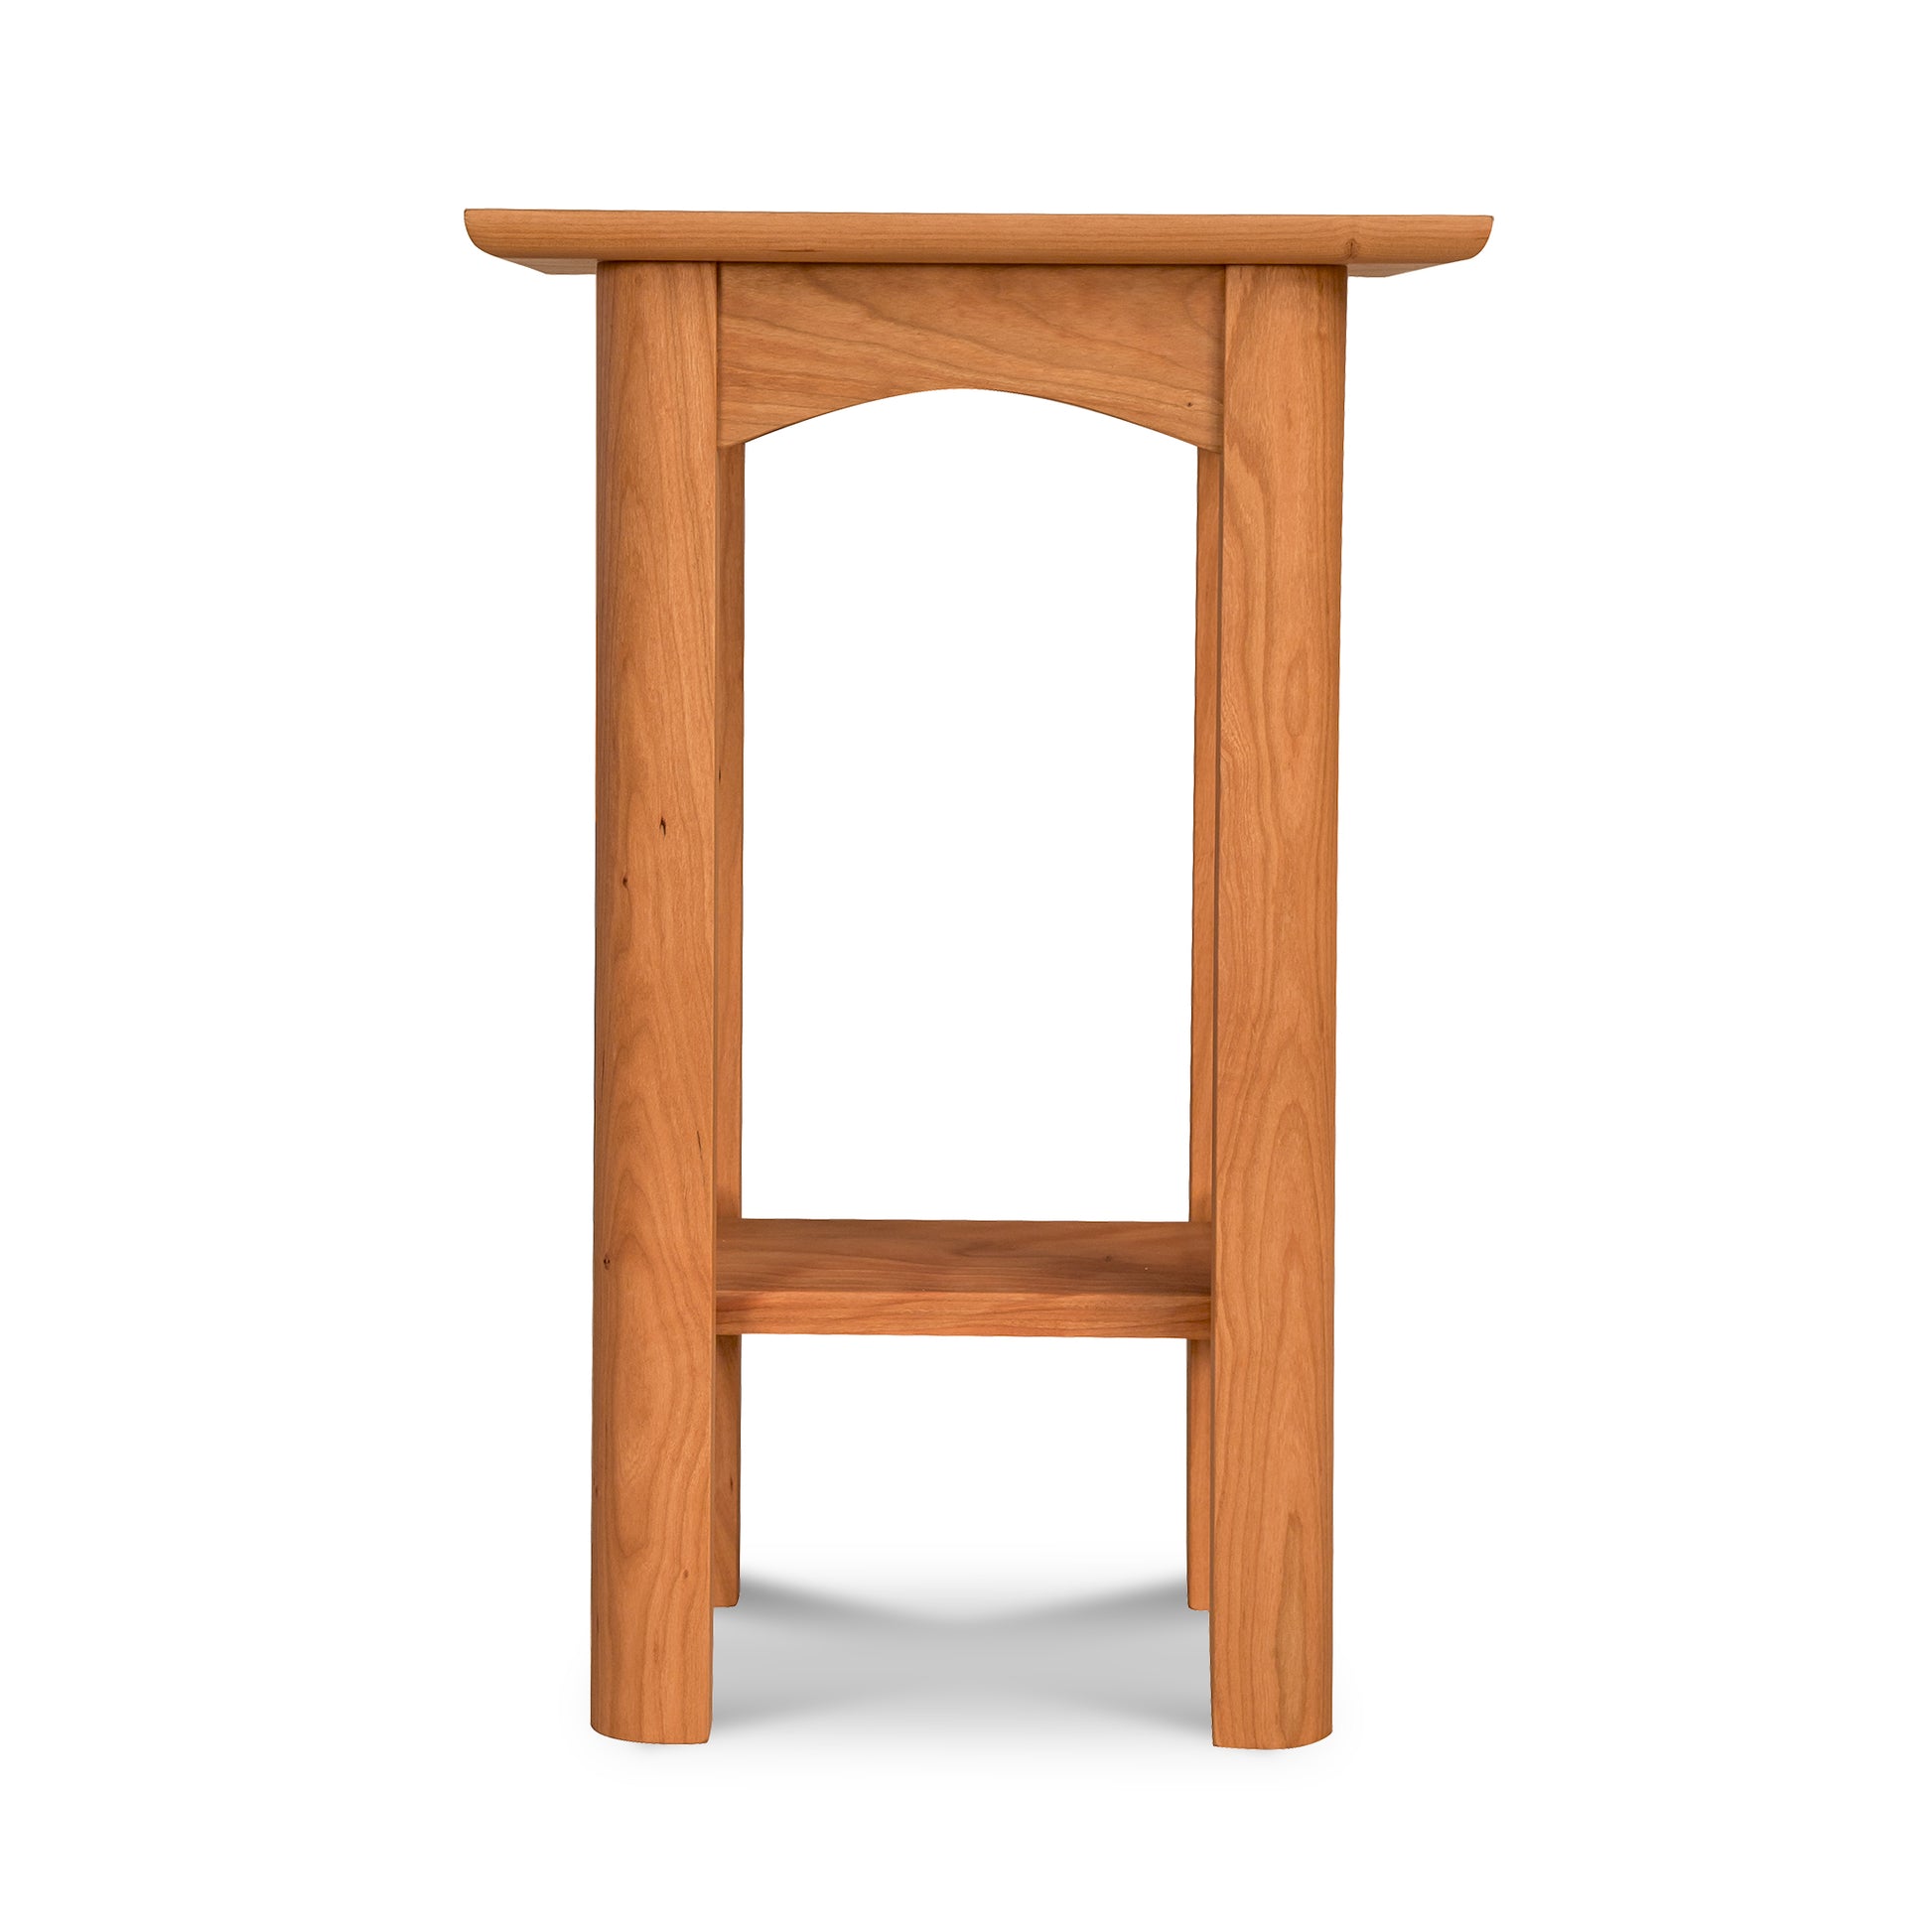 A Vermont Furniture Designs Heartwood Shaker End Table with a single backrest and no seat cushion, isolated on a white background.